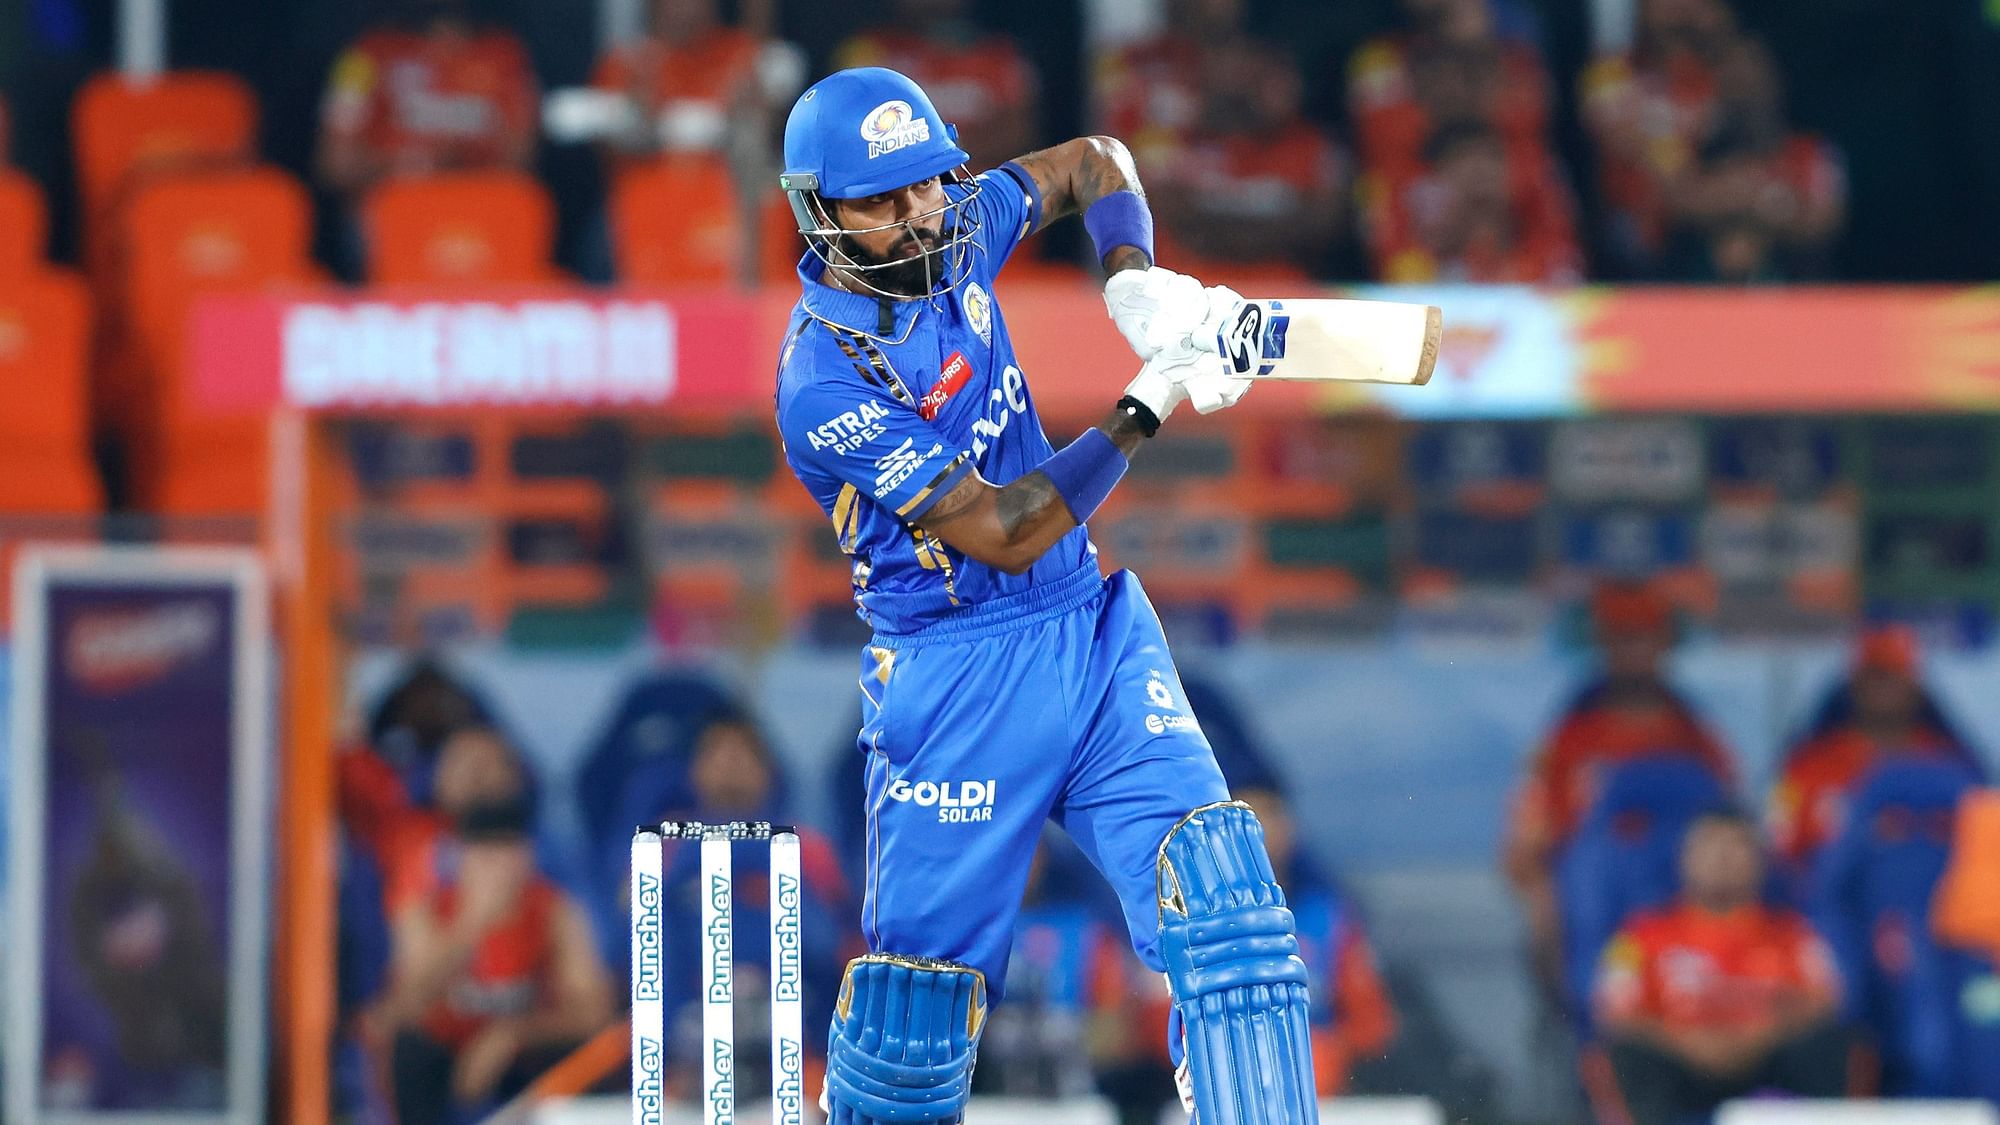 <div class="paragraphs"><p>Hardik Pandya expresses his thoughts after losing to Sunrisers Hyderabad</p></div>